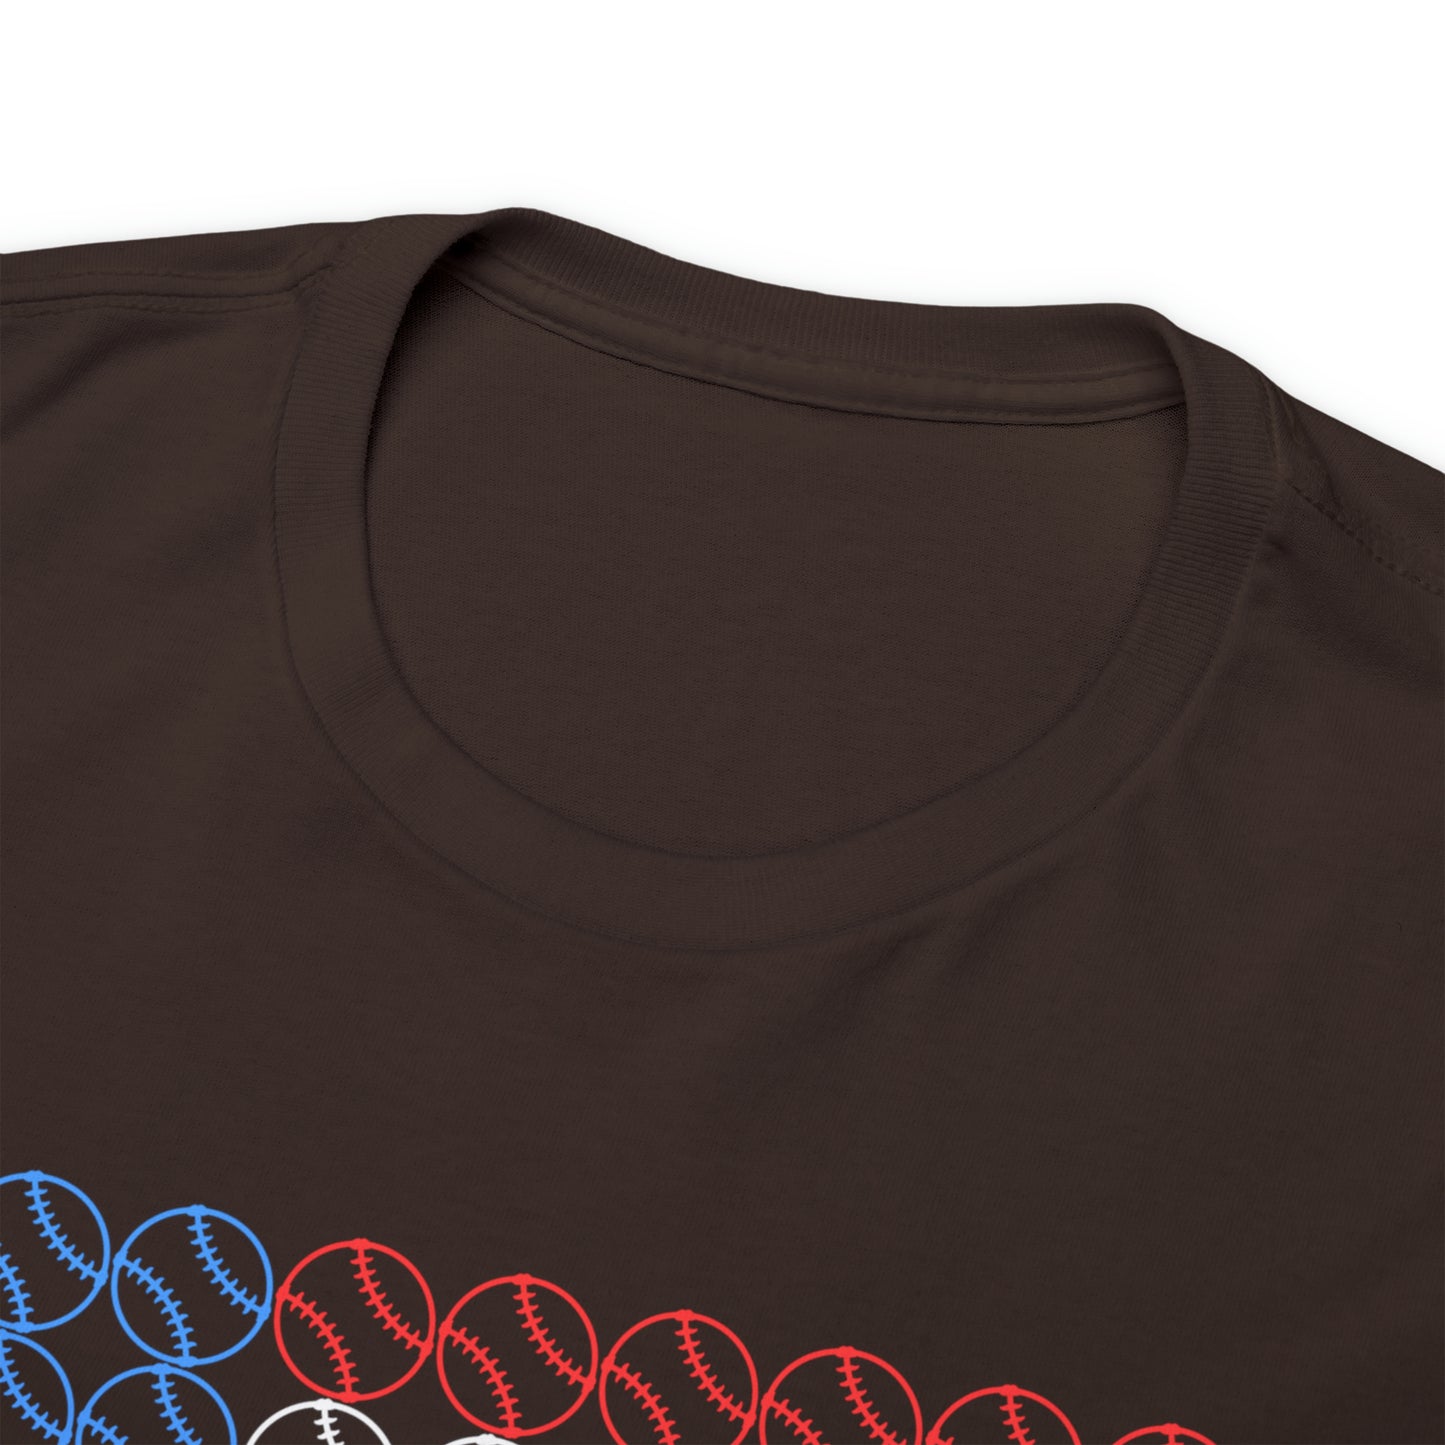 "American Flag Baseball" T-Shirt - Weave Got Gifts - Unique Gifts You Won’t Find Anywhere Else!